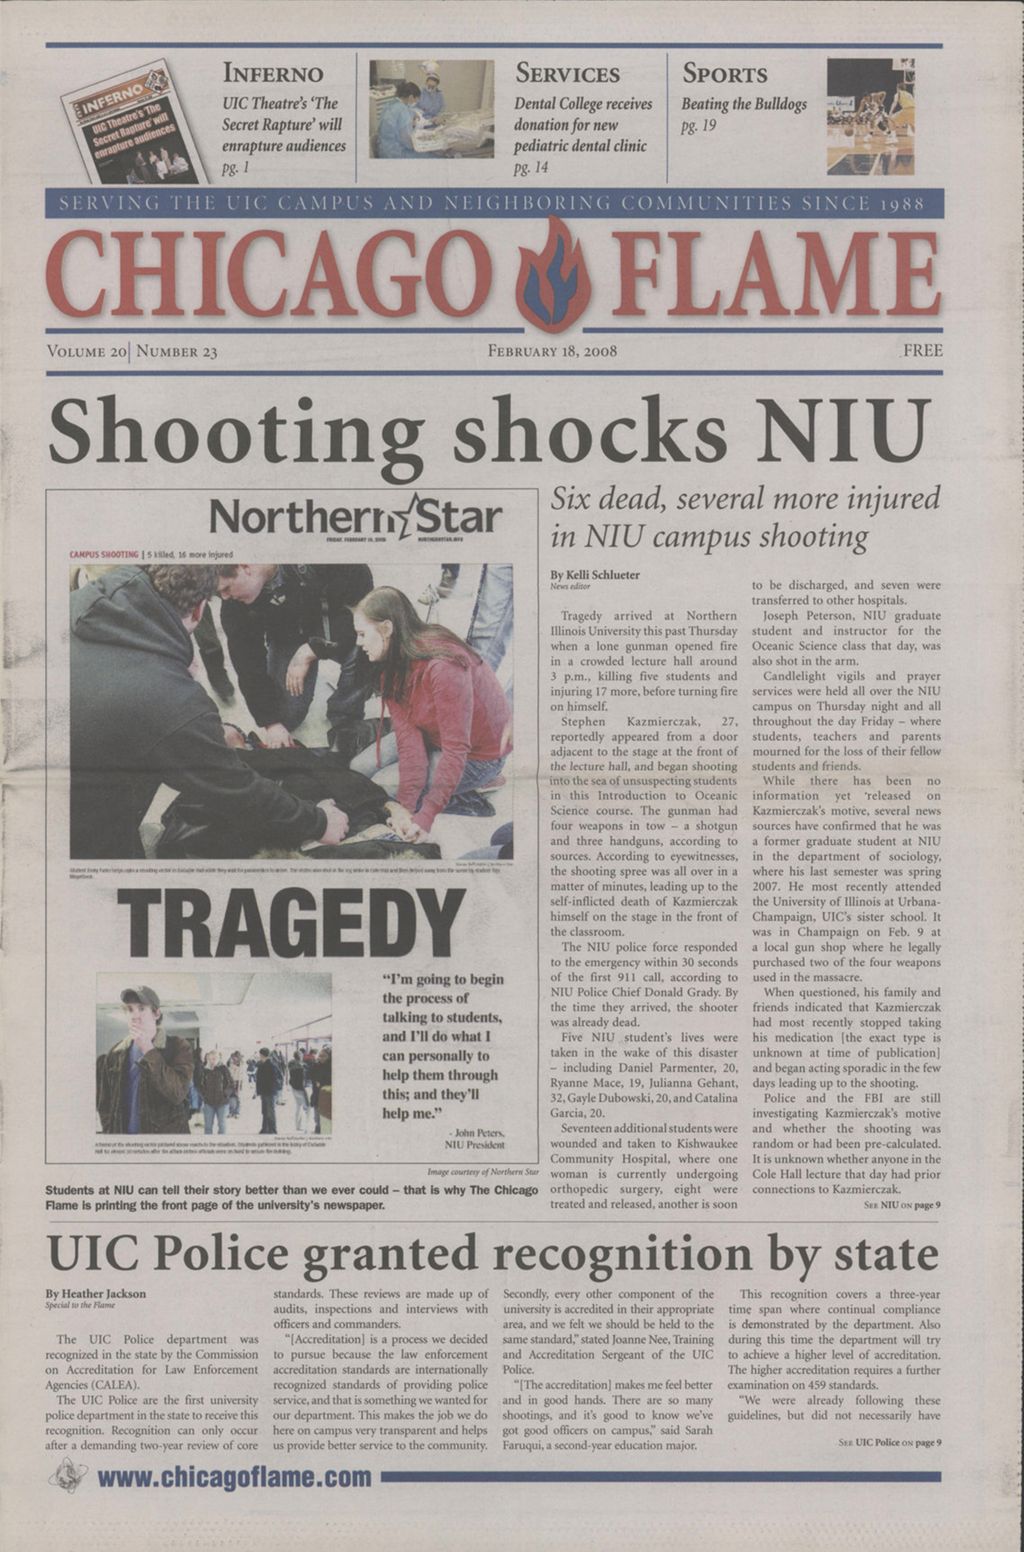 Miniature of Chicago Flame (February 18, 2008)